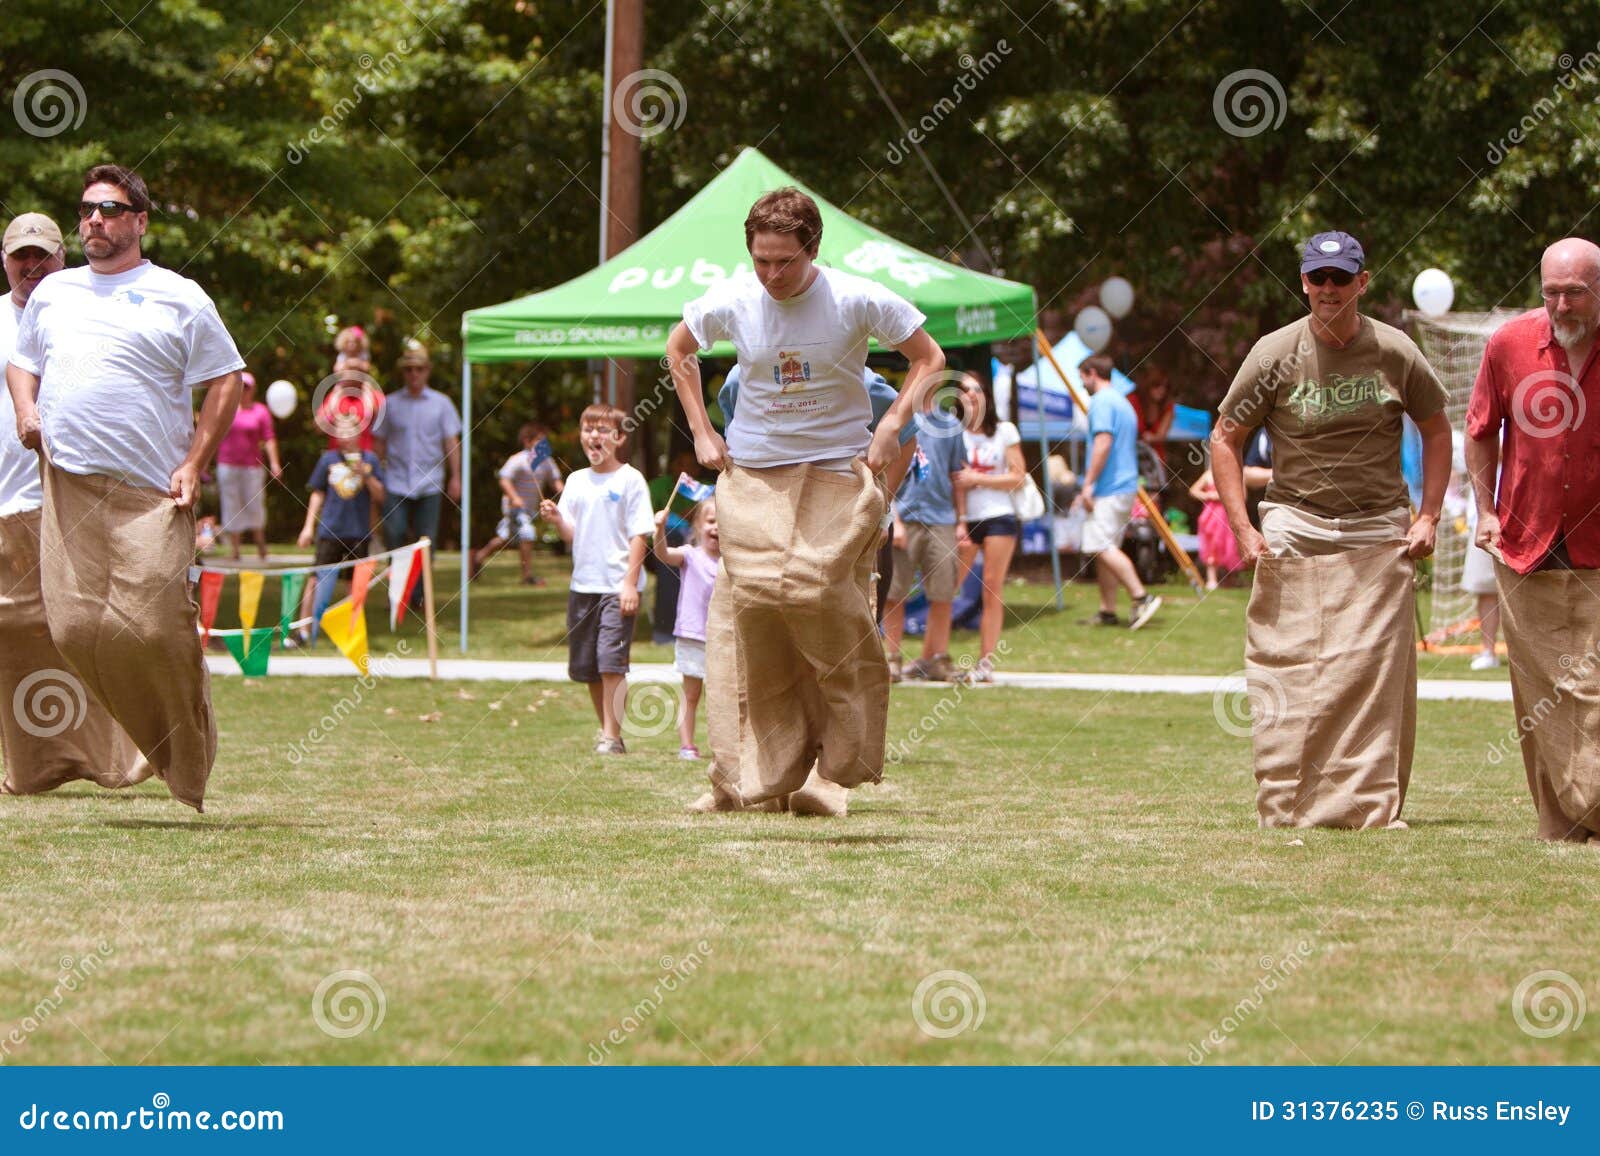 Men Compete in Sack Race at Spring Festival Editorial Image - Image of ...